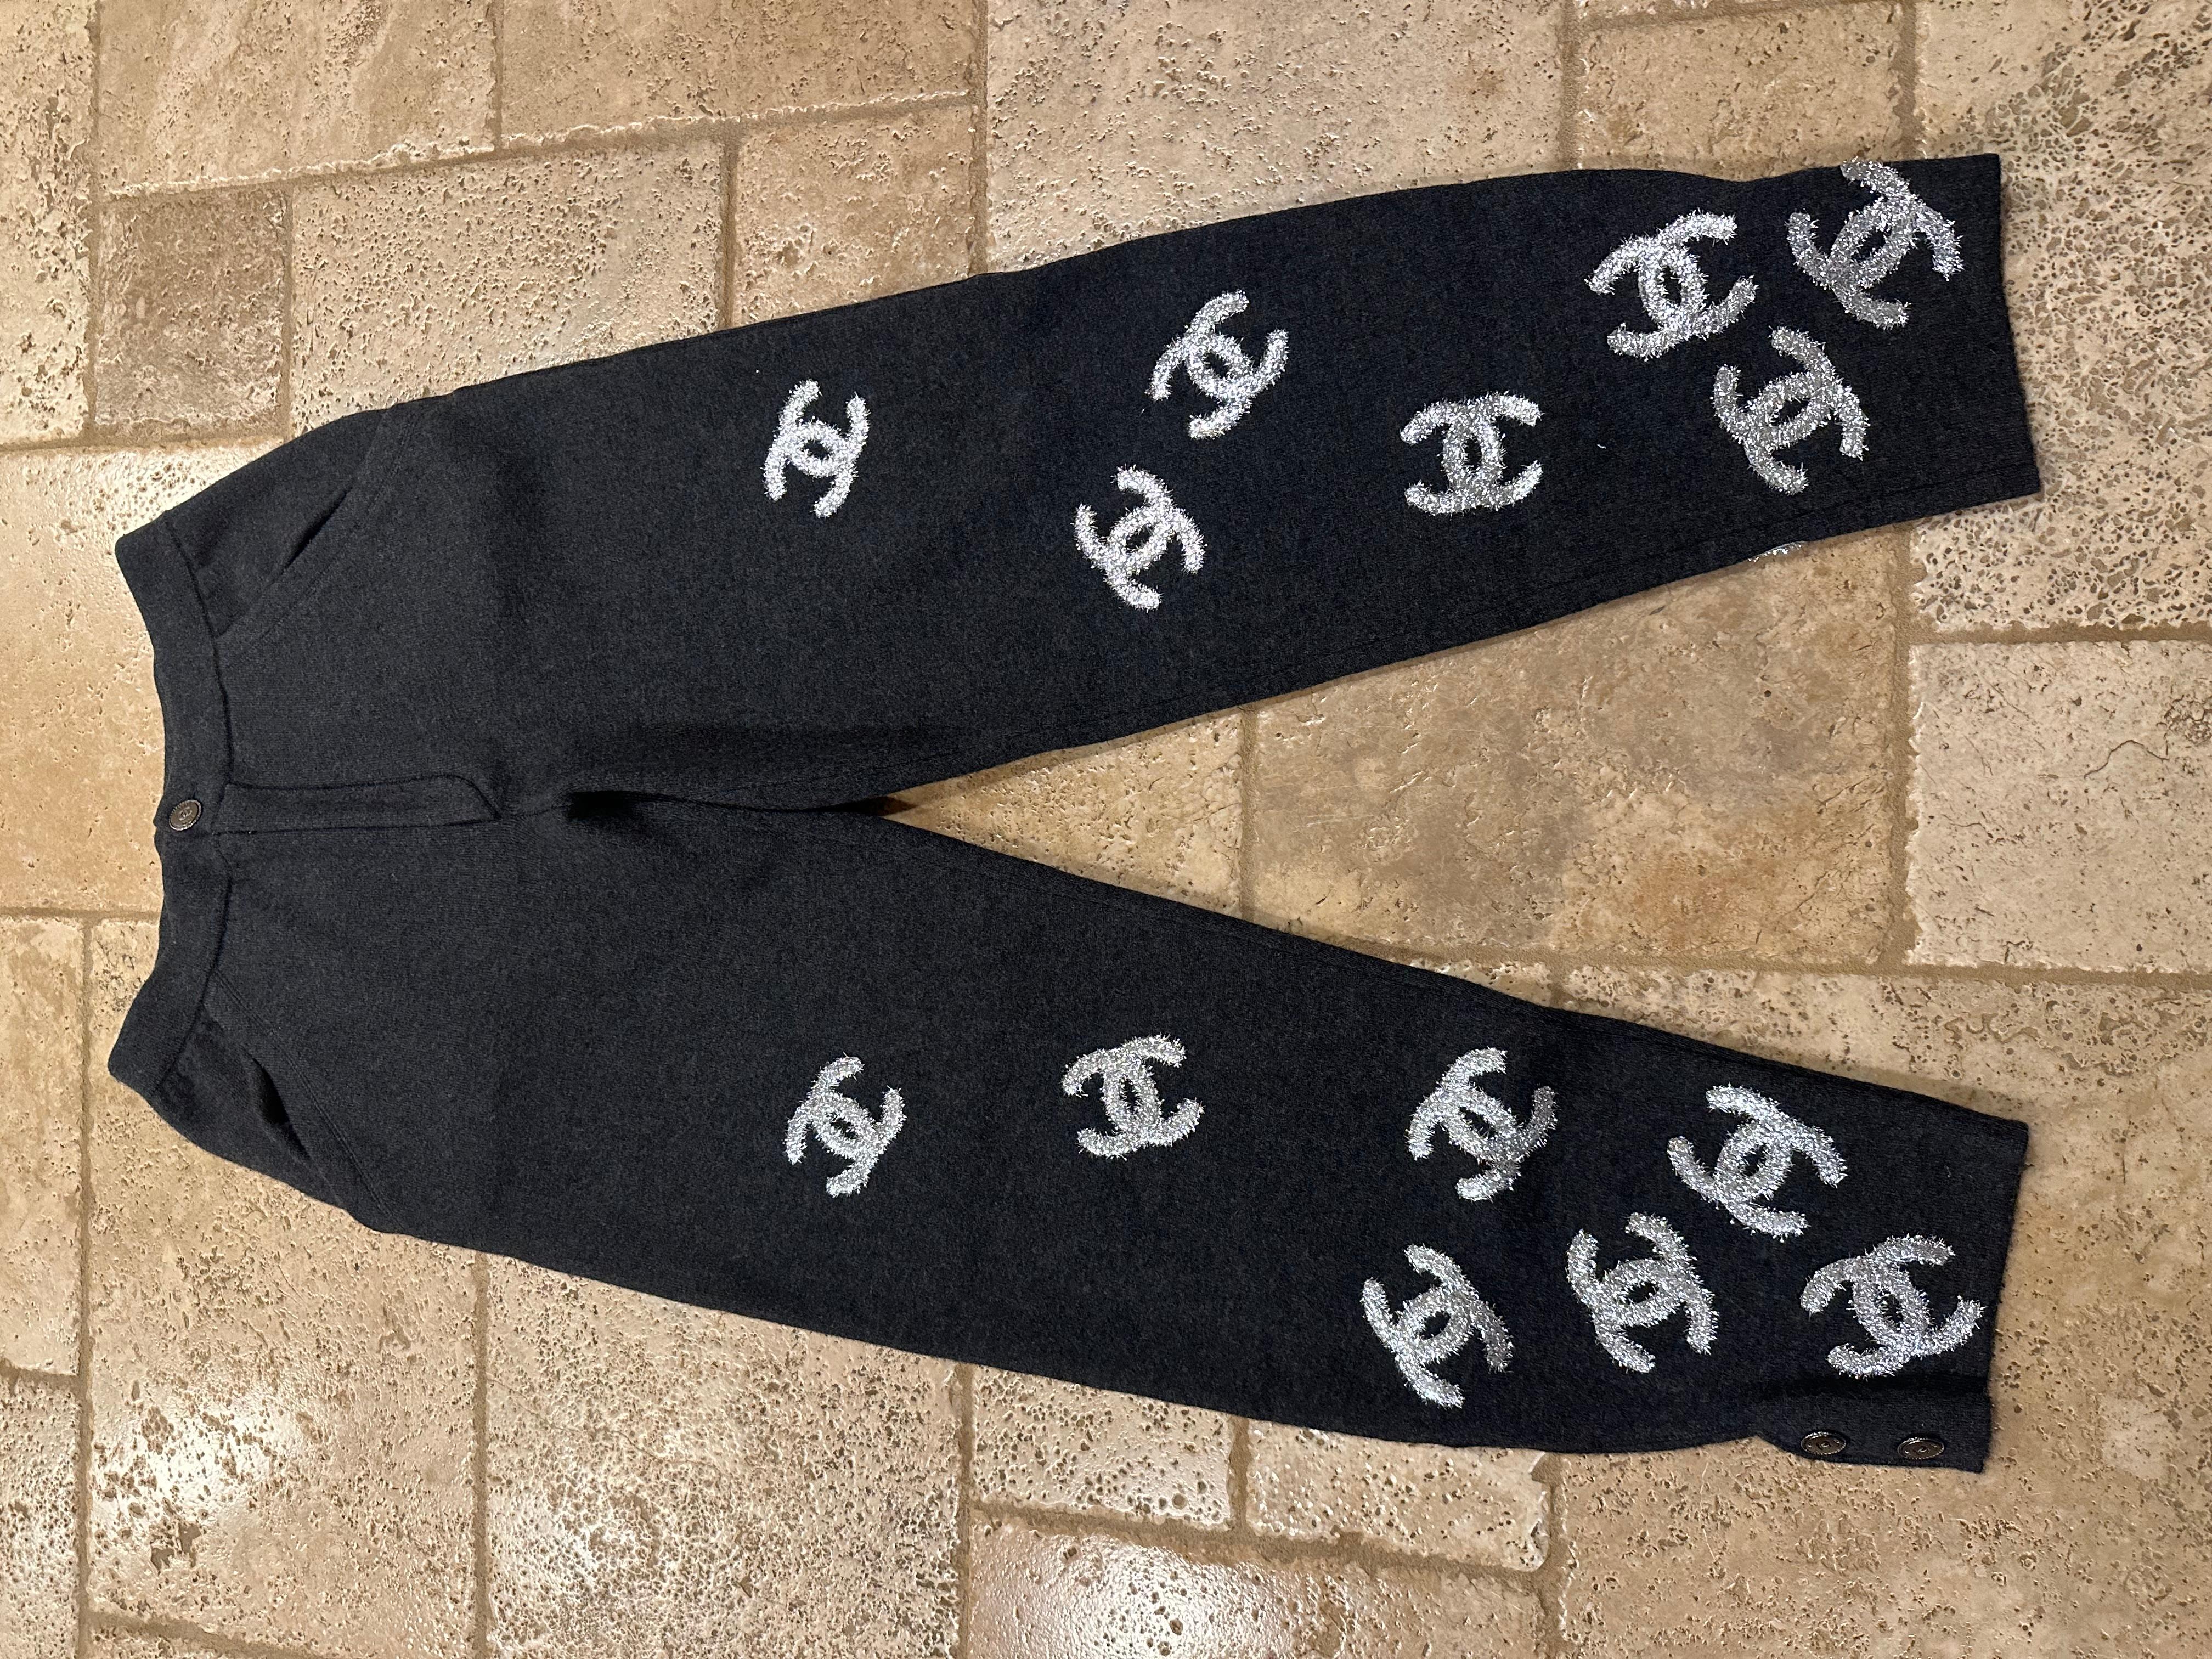 Chanel Grey Cashmere Glitter CC Logo Unisex Pants

Size 38
Excellent condition
Comes w/ tags & extra buttons

Very rare Chanel cashmere pants
As seen on Pusha T, Victor Victor & Future

Measurements:
Chest: 14.25”
Inseam: 30”
Front rise: 12.75”

ALL